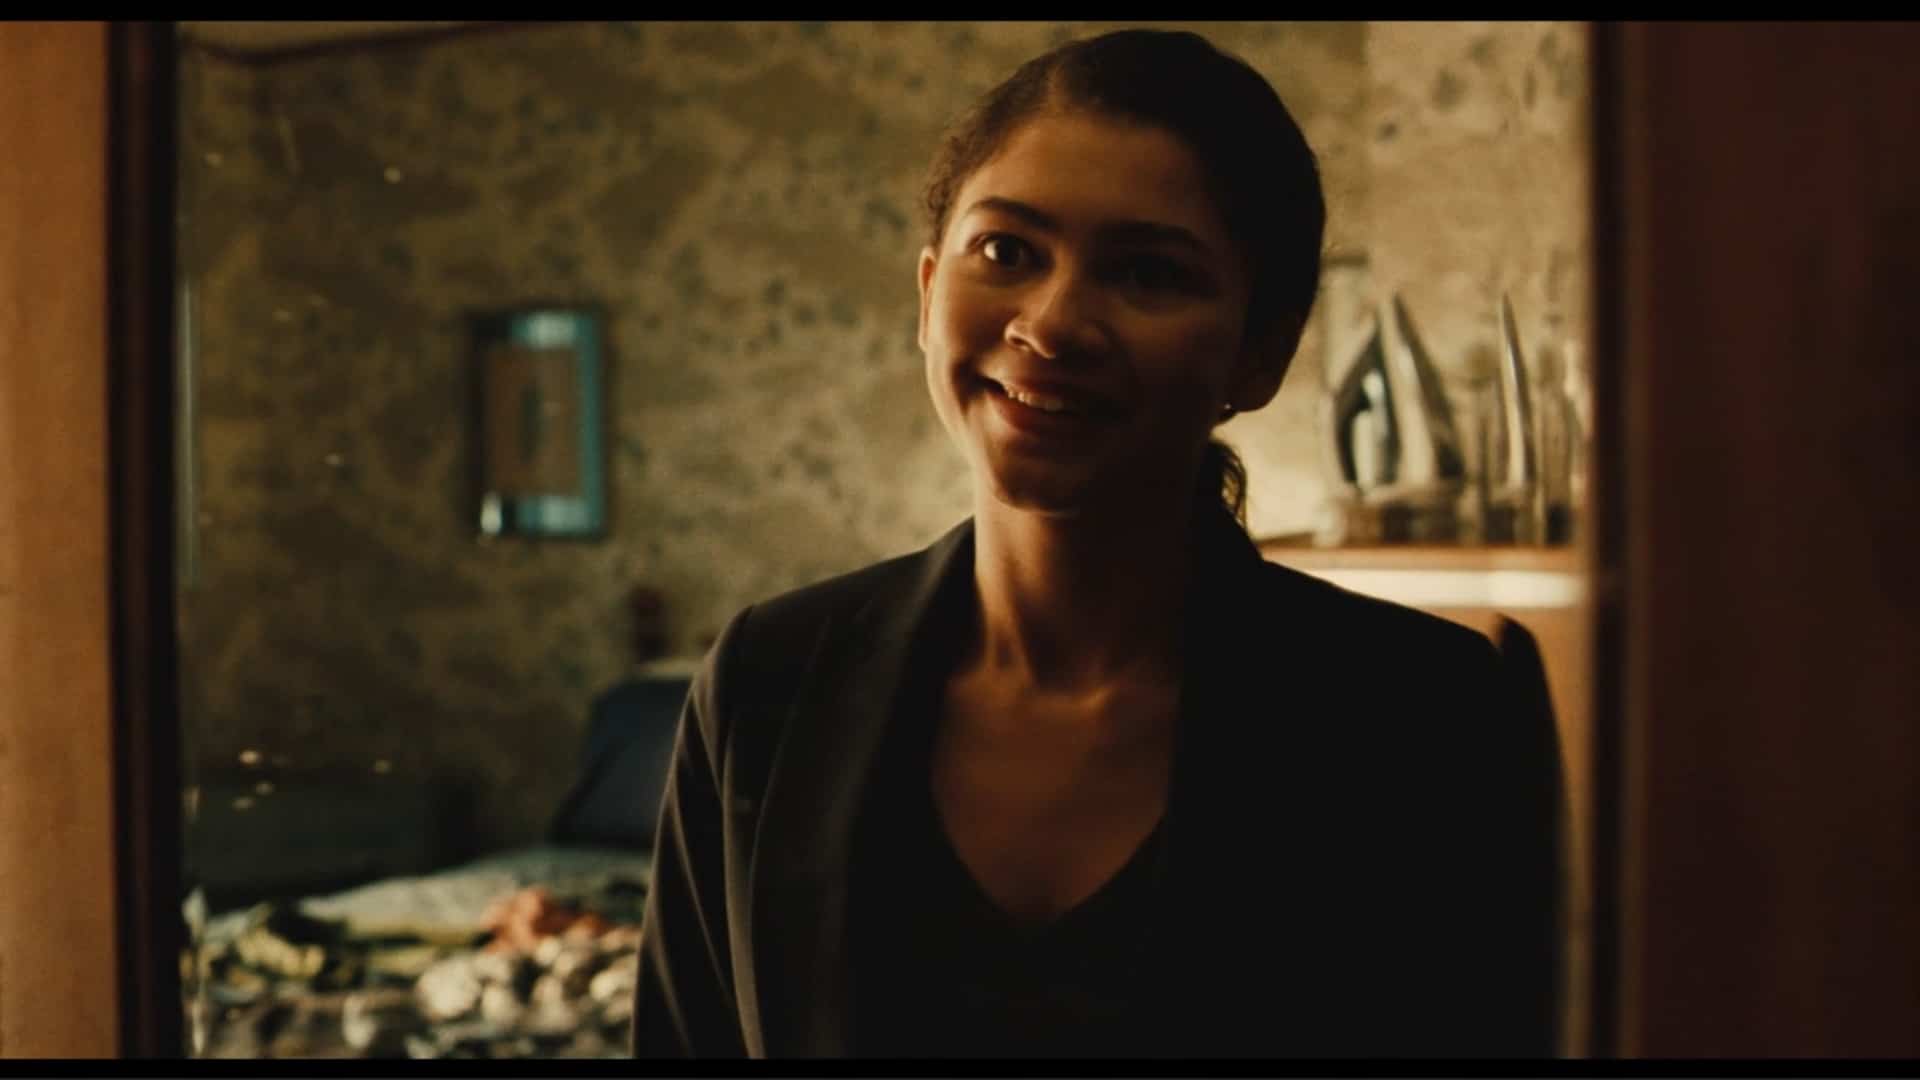 Rue smiling, in a creepy way